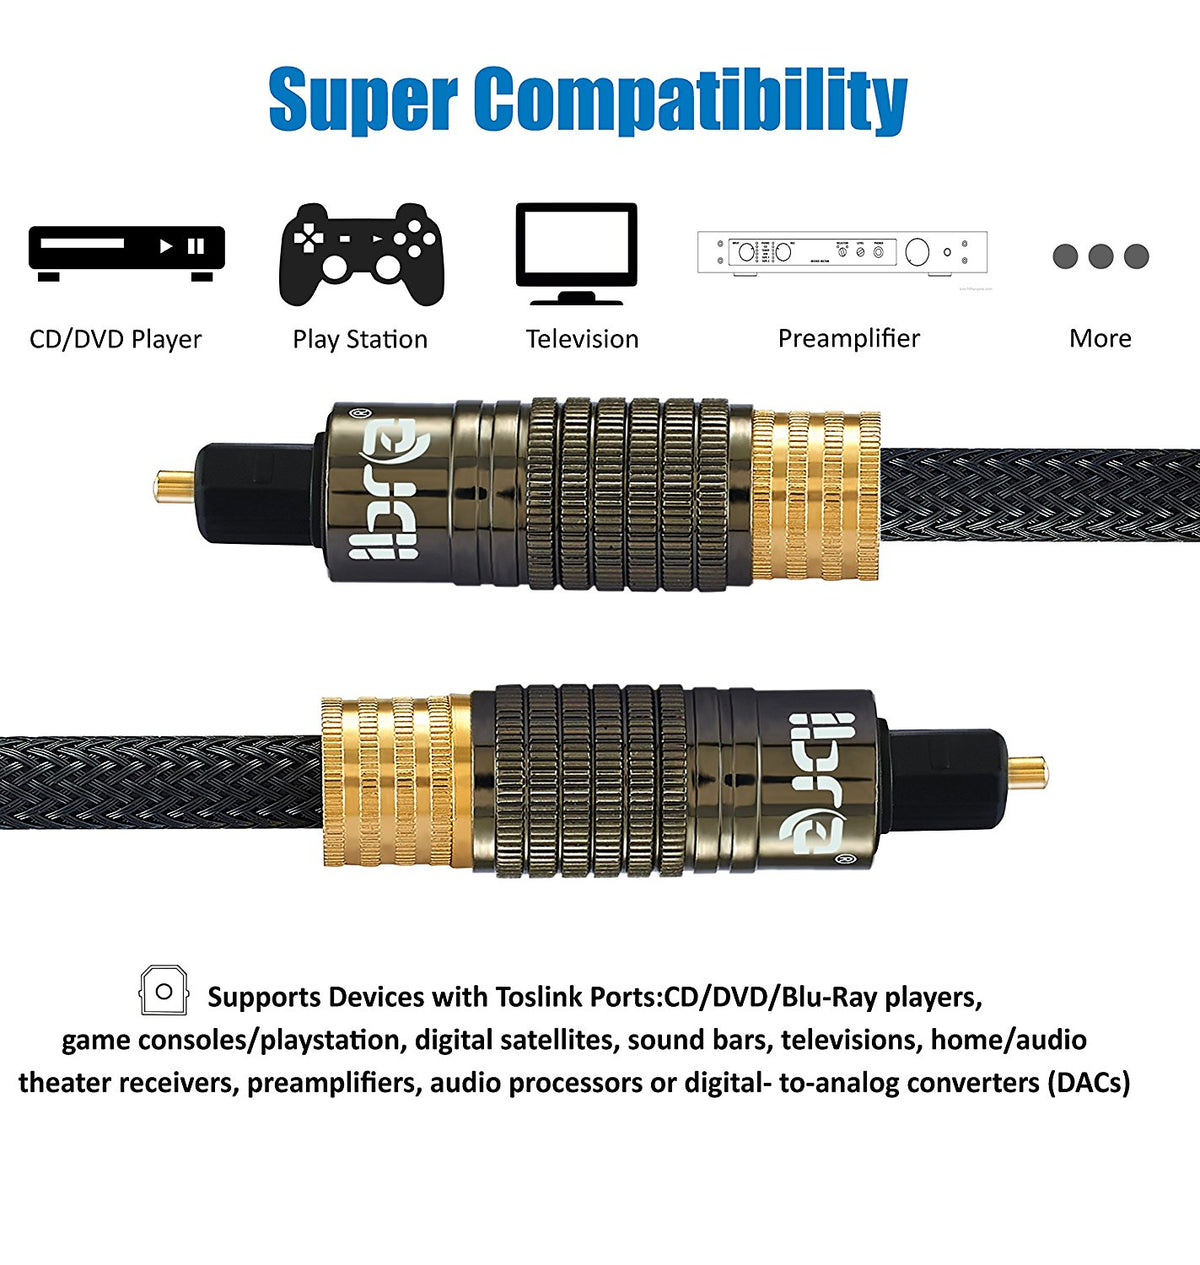 IBRA Muzil Gold 1.5M - Digital Optical Cable | Toslink / Audio Cable | Fibre Optic Cable | Suitable for PS3, Sky, Sky HD, LCD, LED, Plasma, Blu-ray, AV Amps